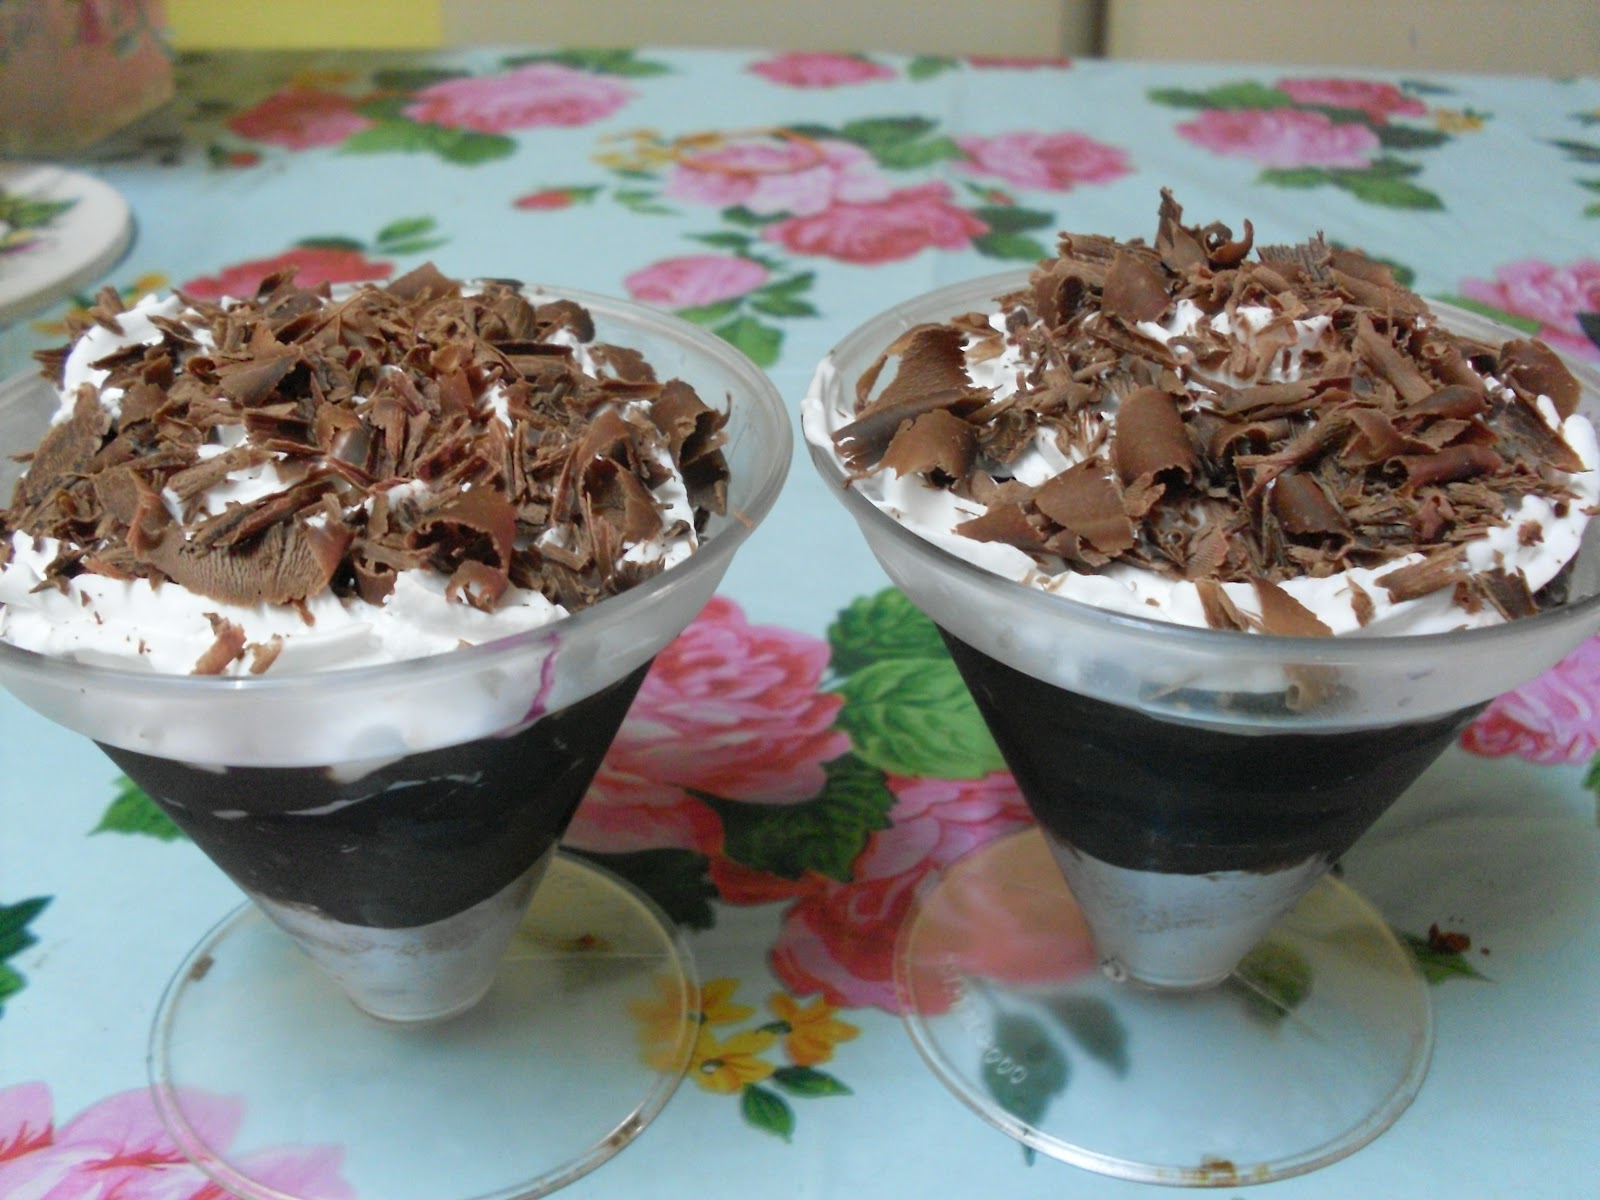 My Kitchen Diary: BLACKFOREST IN CUP